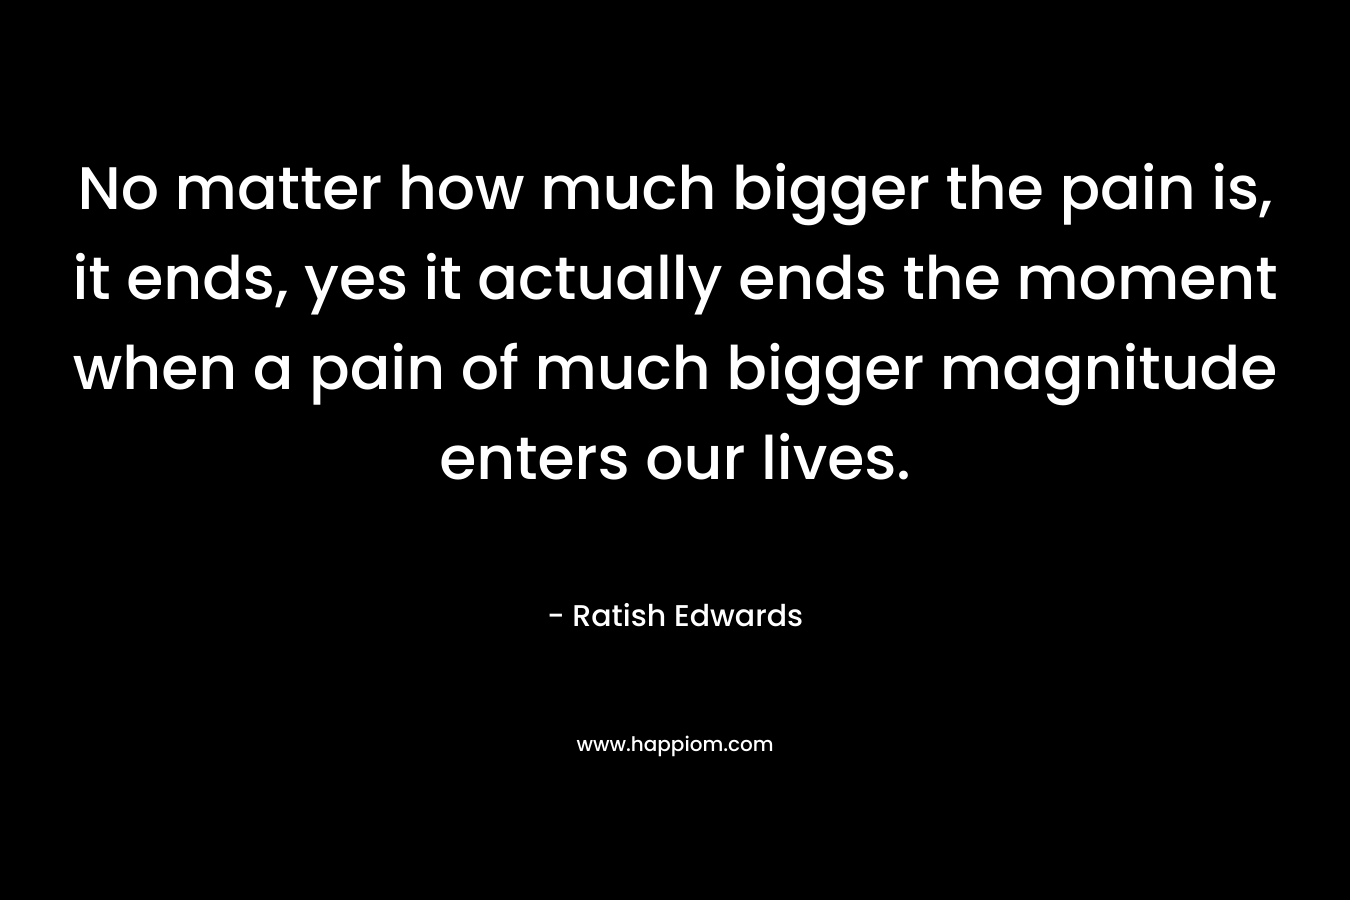 No matter how much bigger the pain is, it ends, yes it actually ends the moment when a pain of much bigger magnitude enters our lives.